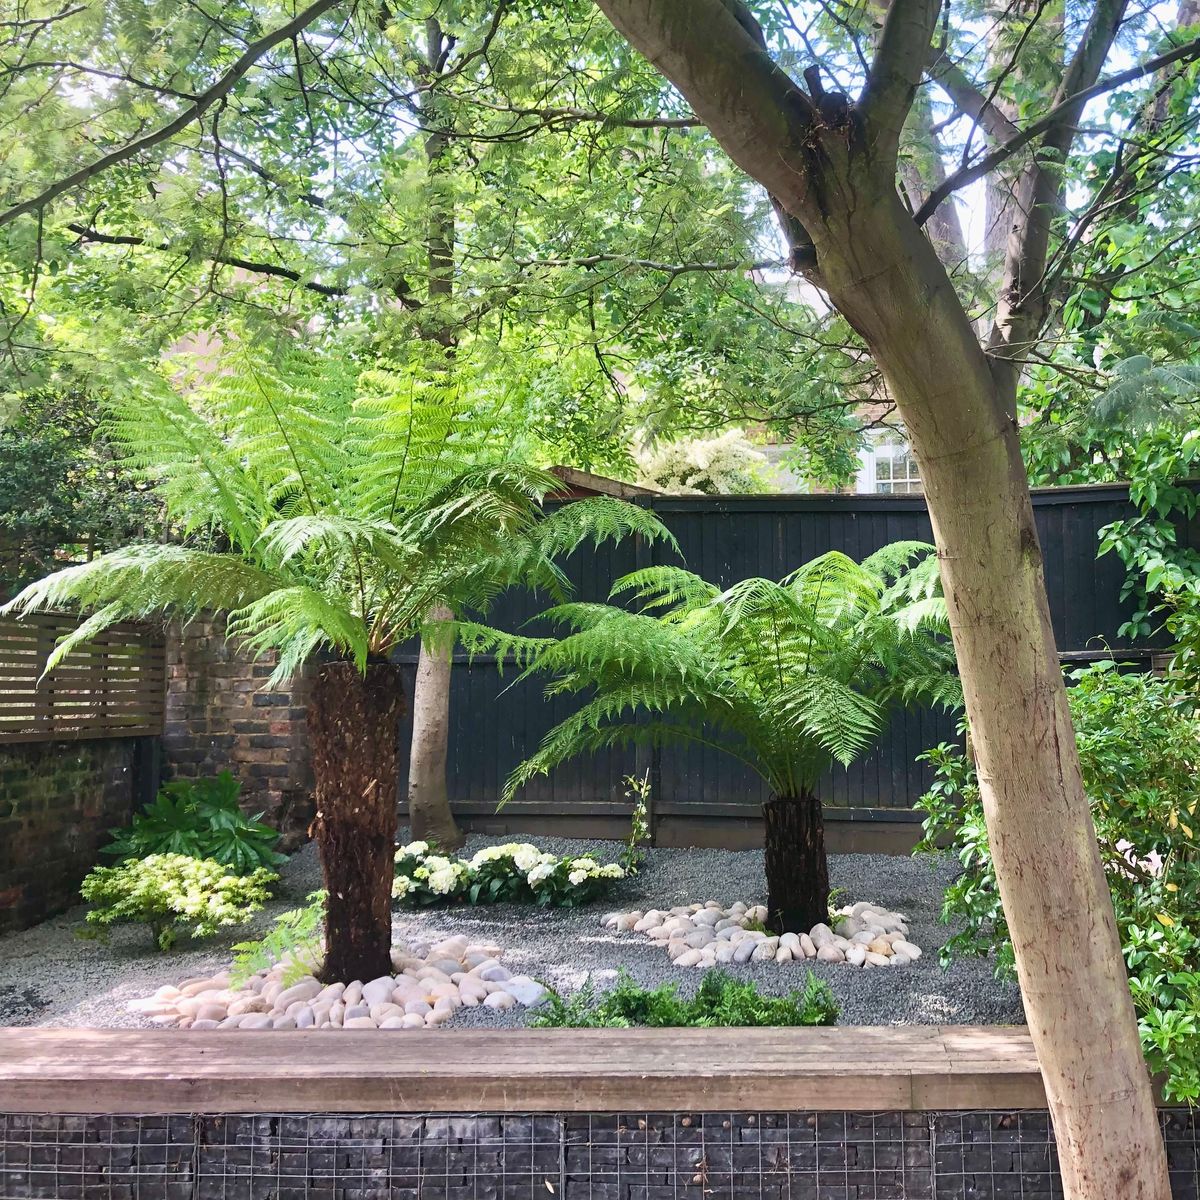 Garden Landscape Design in Hackney Central North London with Mature Tree Ferns as part of Architectural Planting Design and Soft Landscaping Scheme